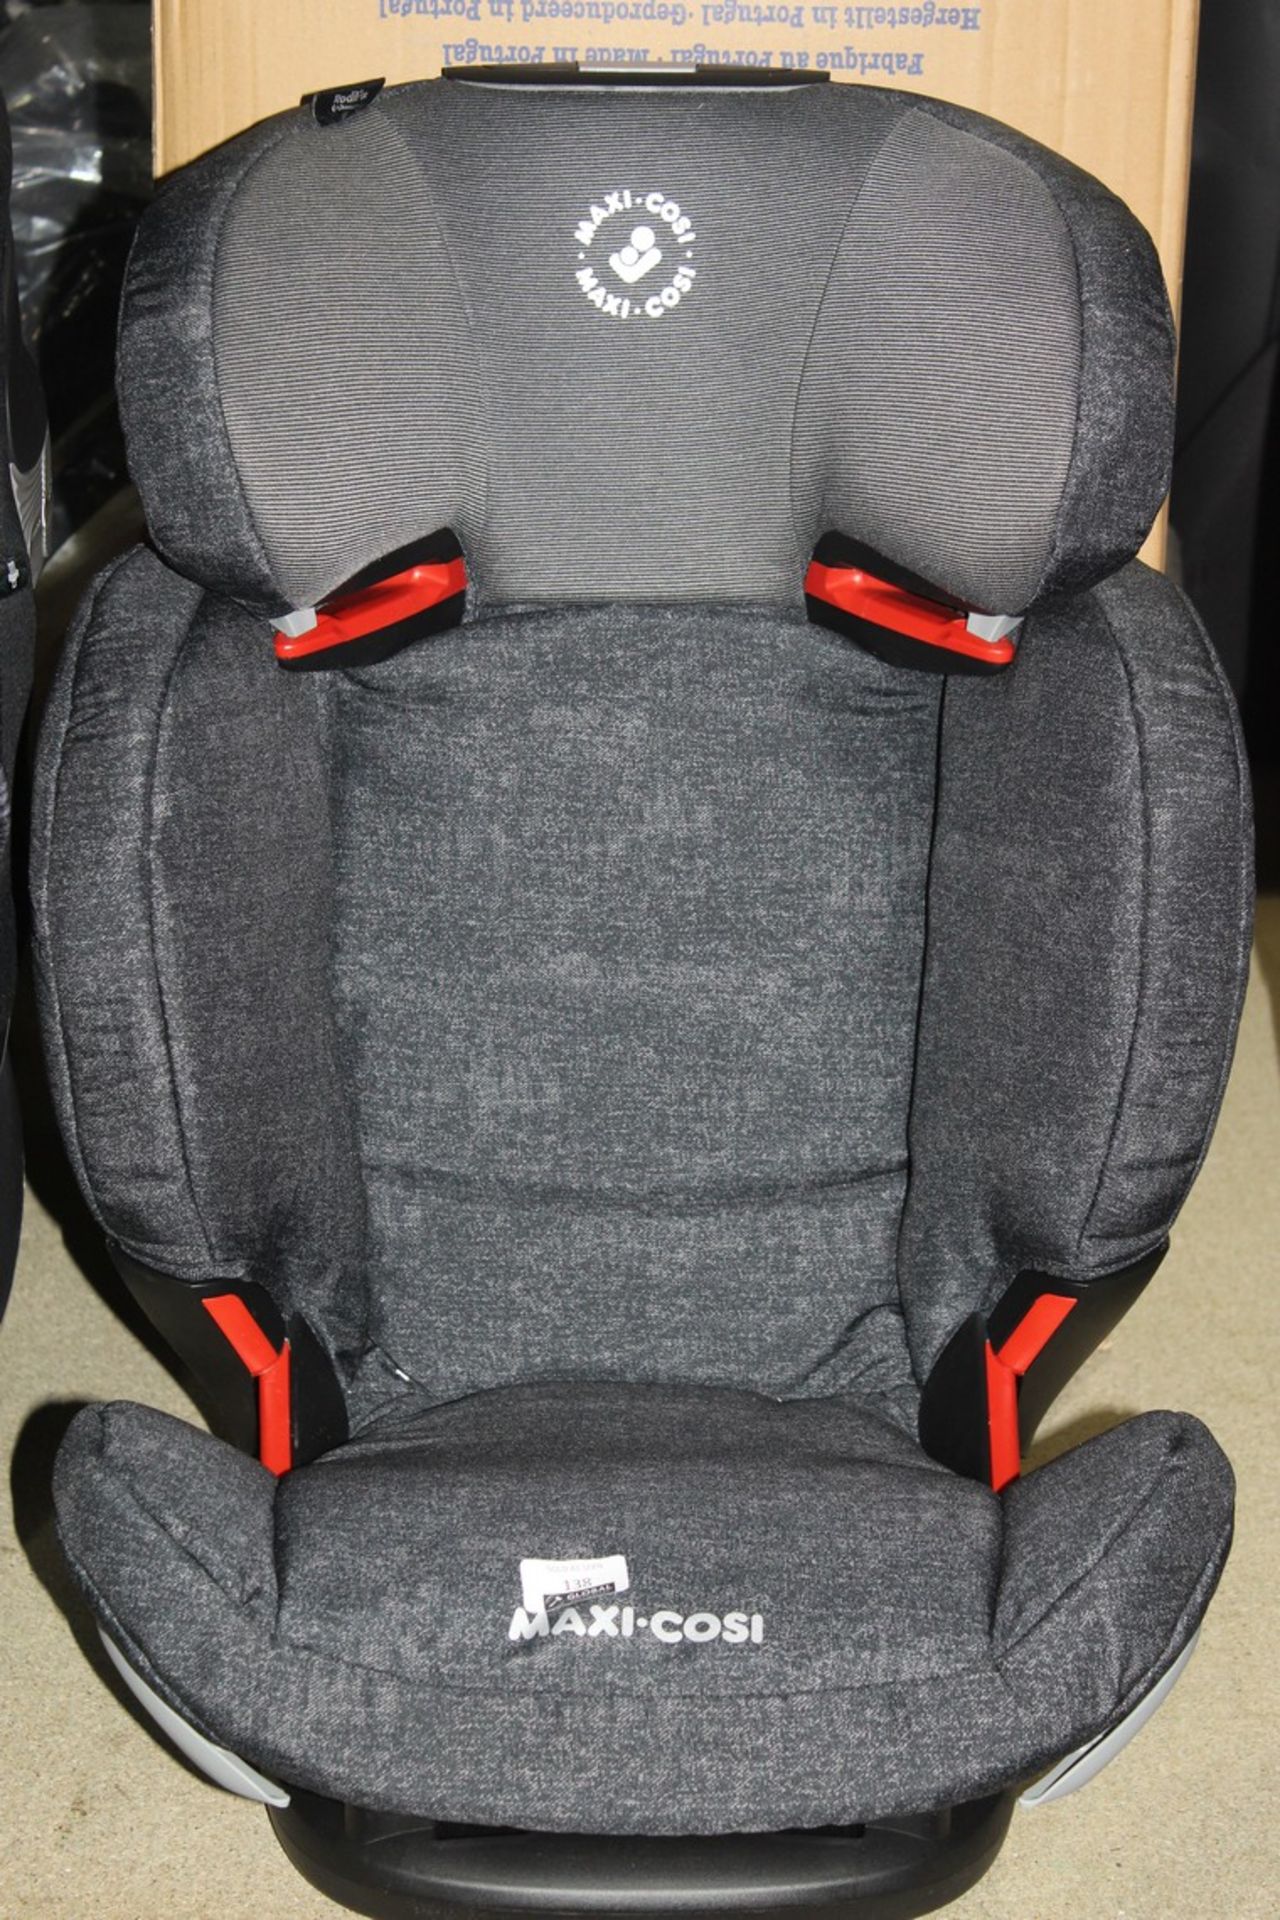 Boxed Maxi Cosi In Rodi In Car Kids Safety Seat RRP £140 (4037283) (Public Viewing and Appraisals